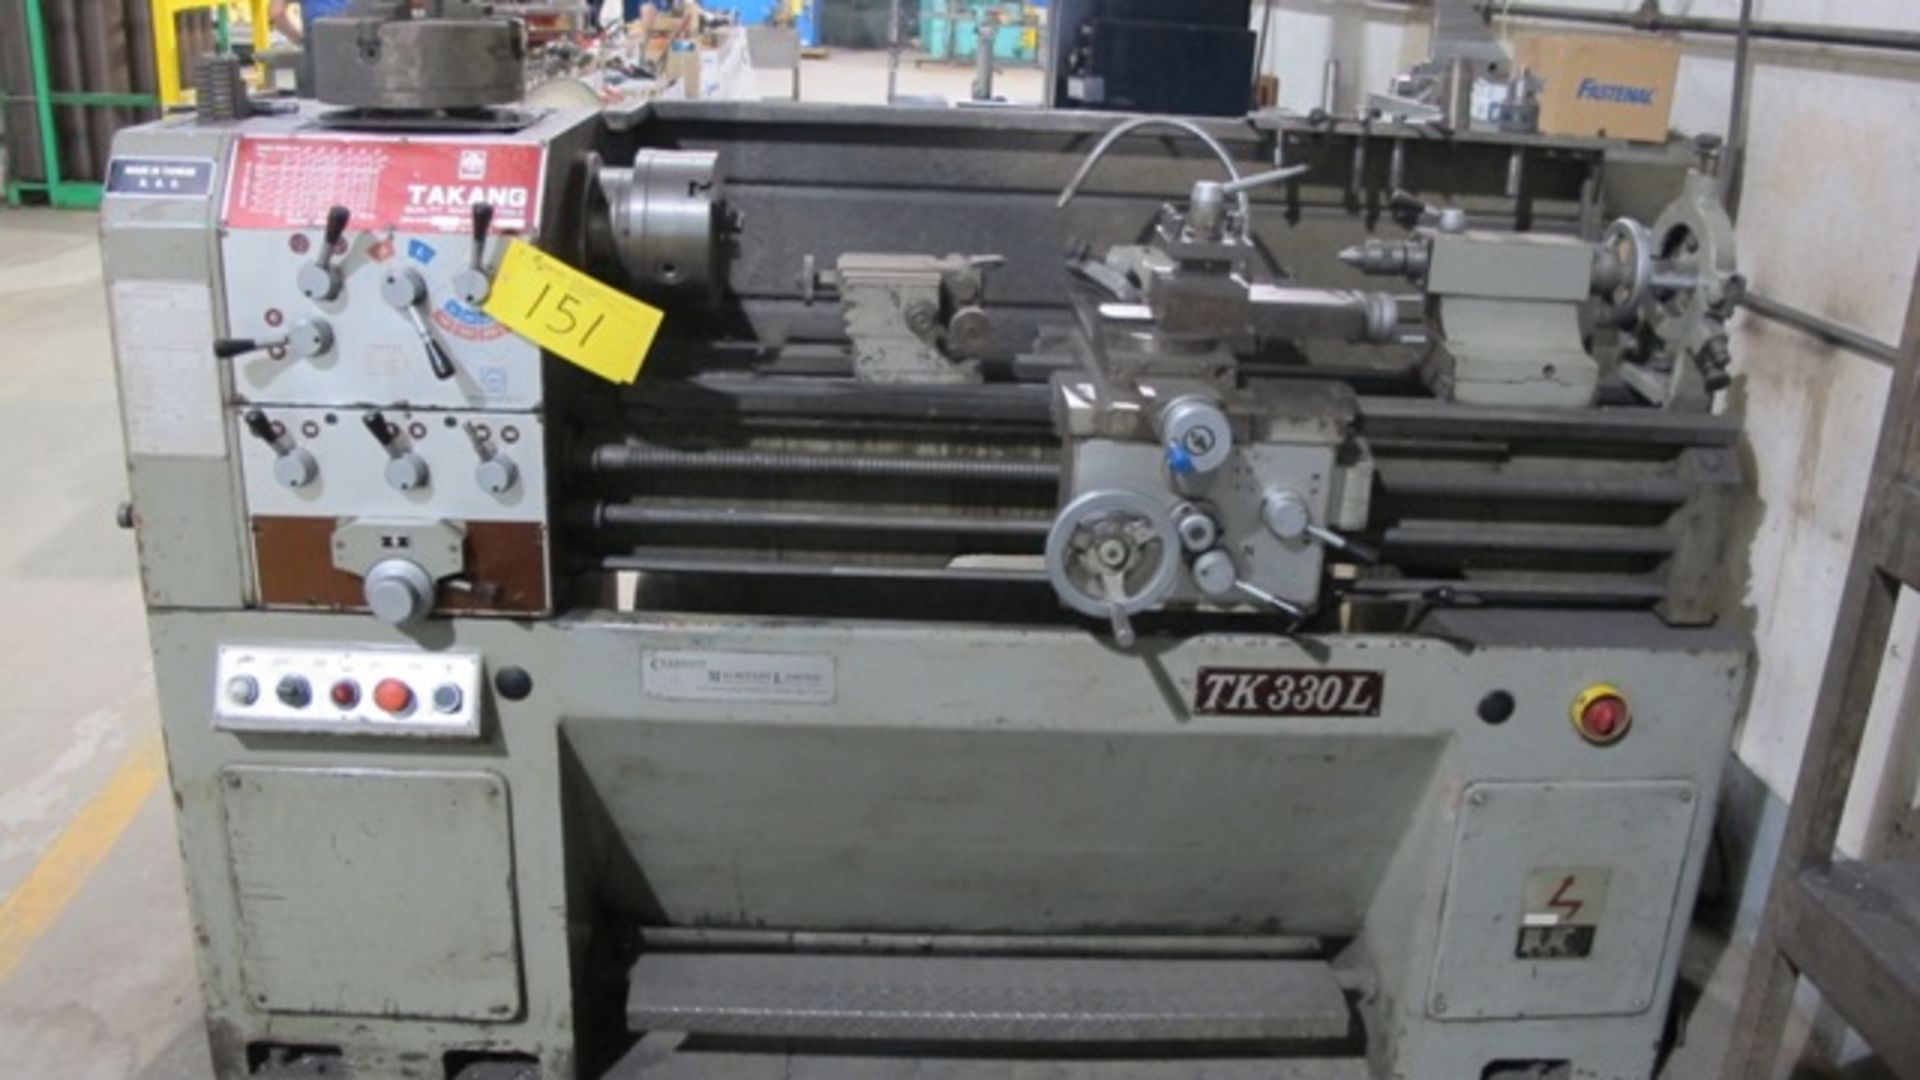 TAKANG TK330L LATHES, 3+4 JAW CHUCKS, TAILSTOCK, TOOL POST, QUICK CHANGE TOOL HOLDER, 14" SWING,